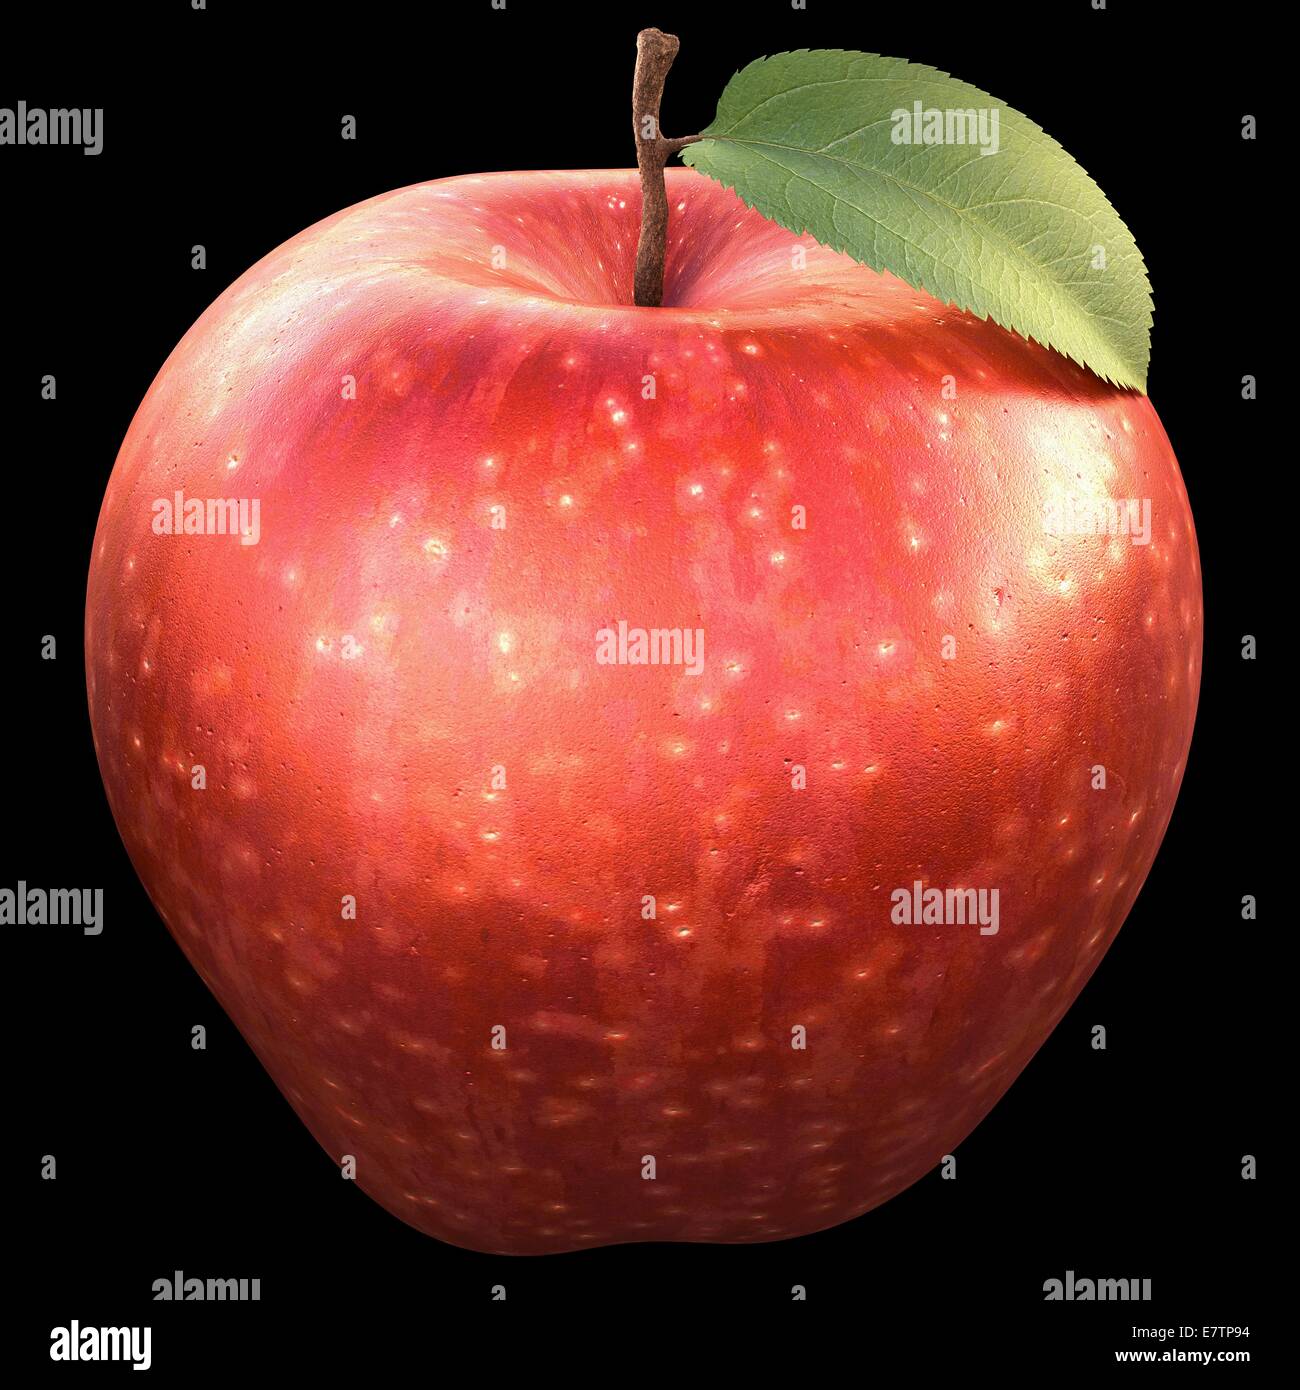 Red apple against a black background, computer artwork. Stock Photo